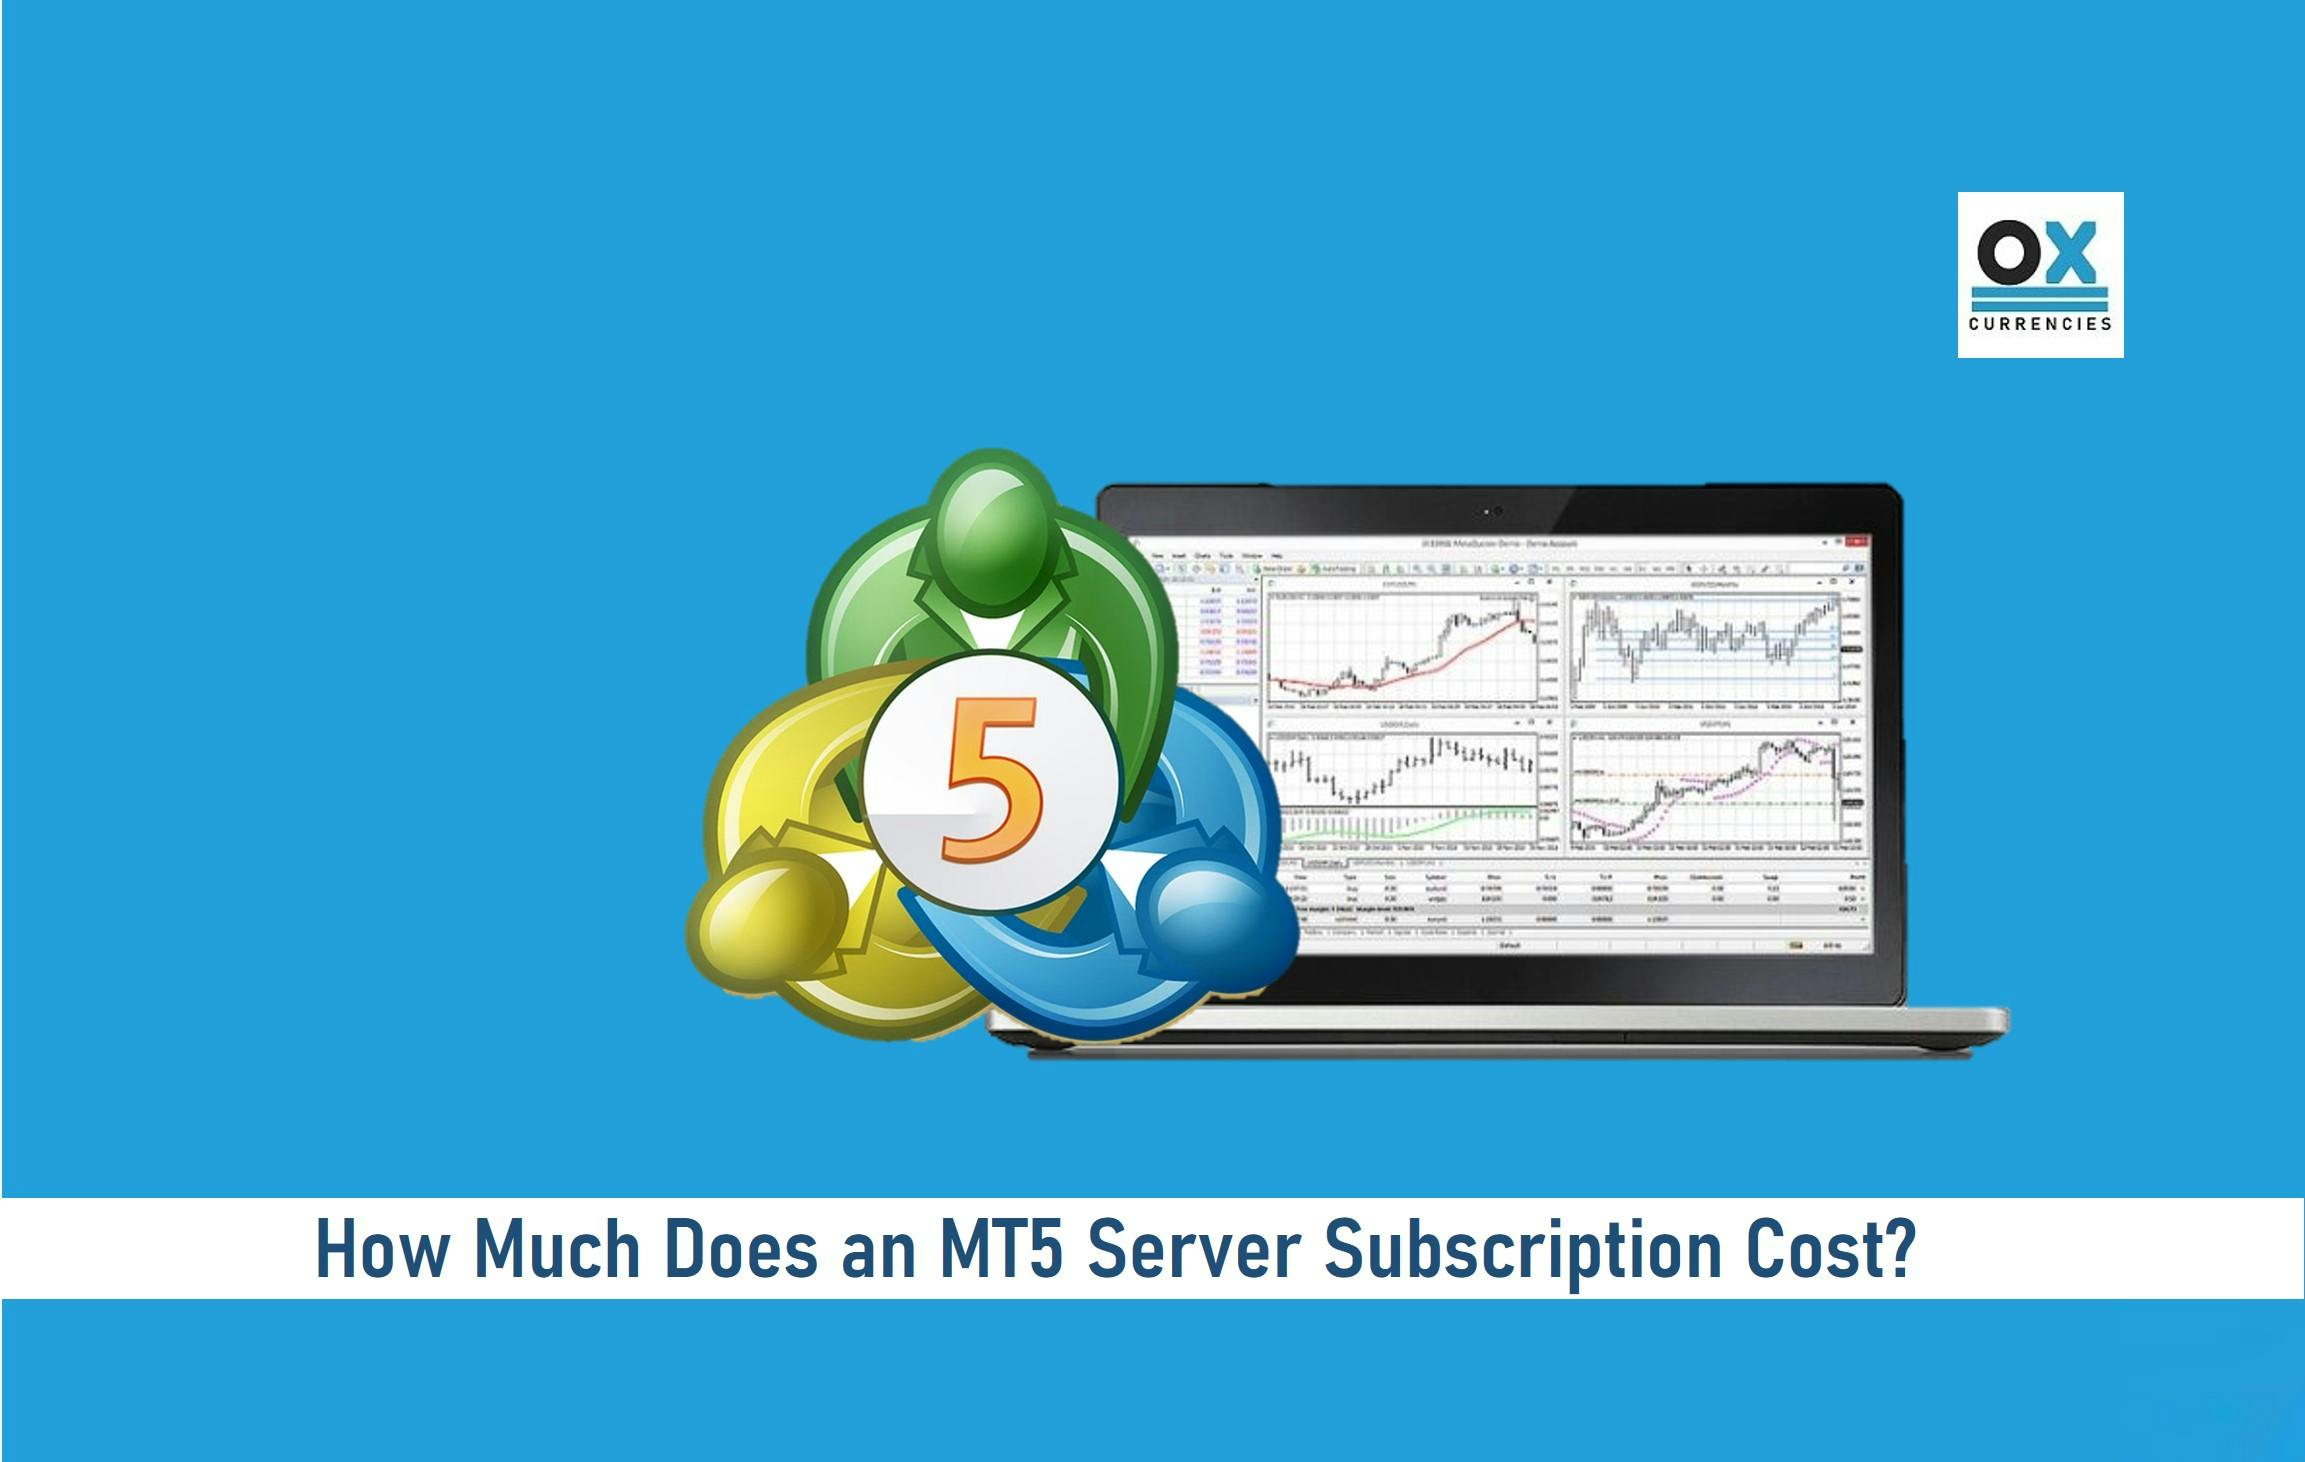 How Much Does an MT5 Server Subscription Cost?